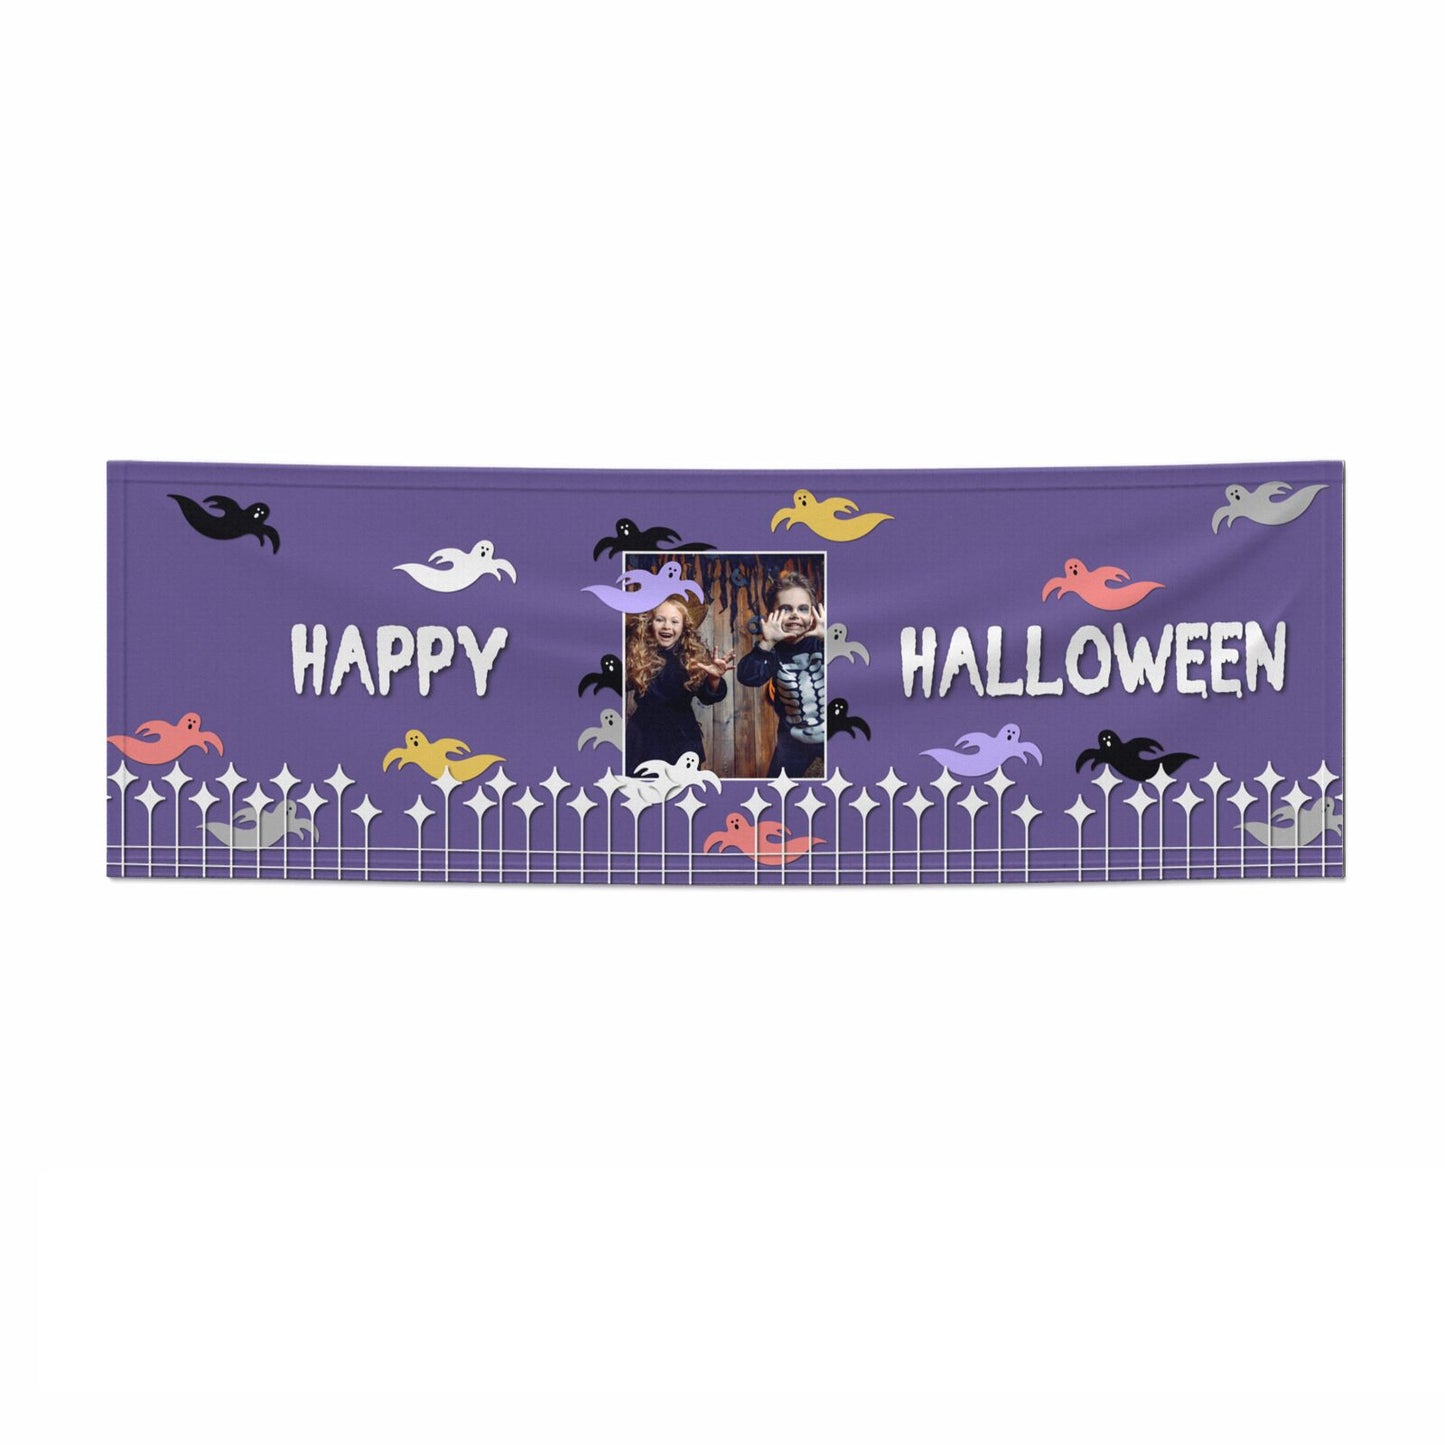 Personalised Halloween Photo Upload 6x2 Paper Banner